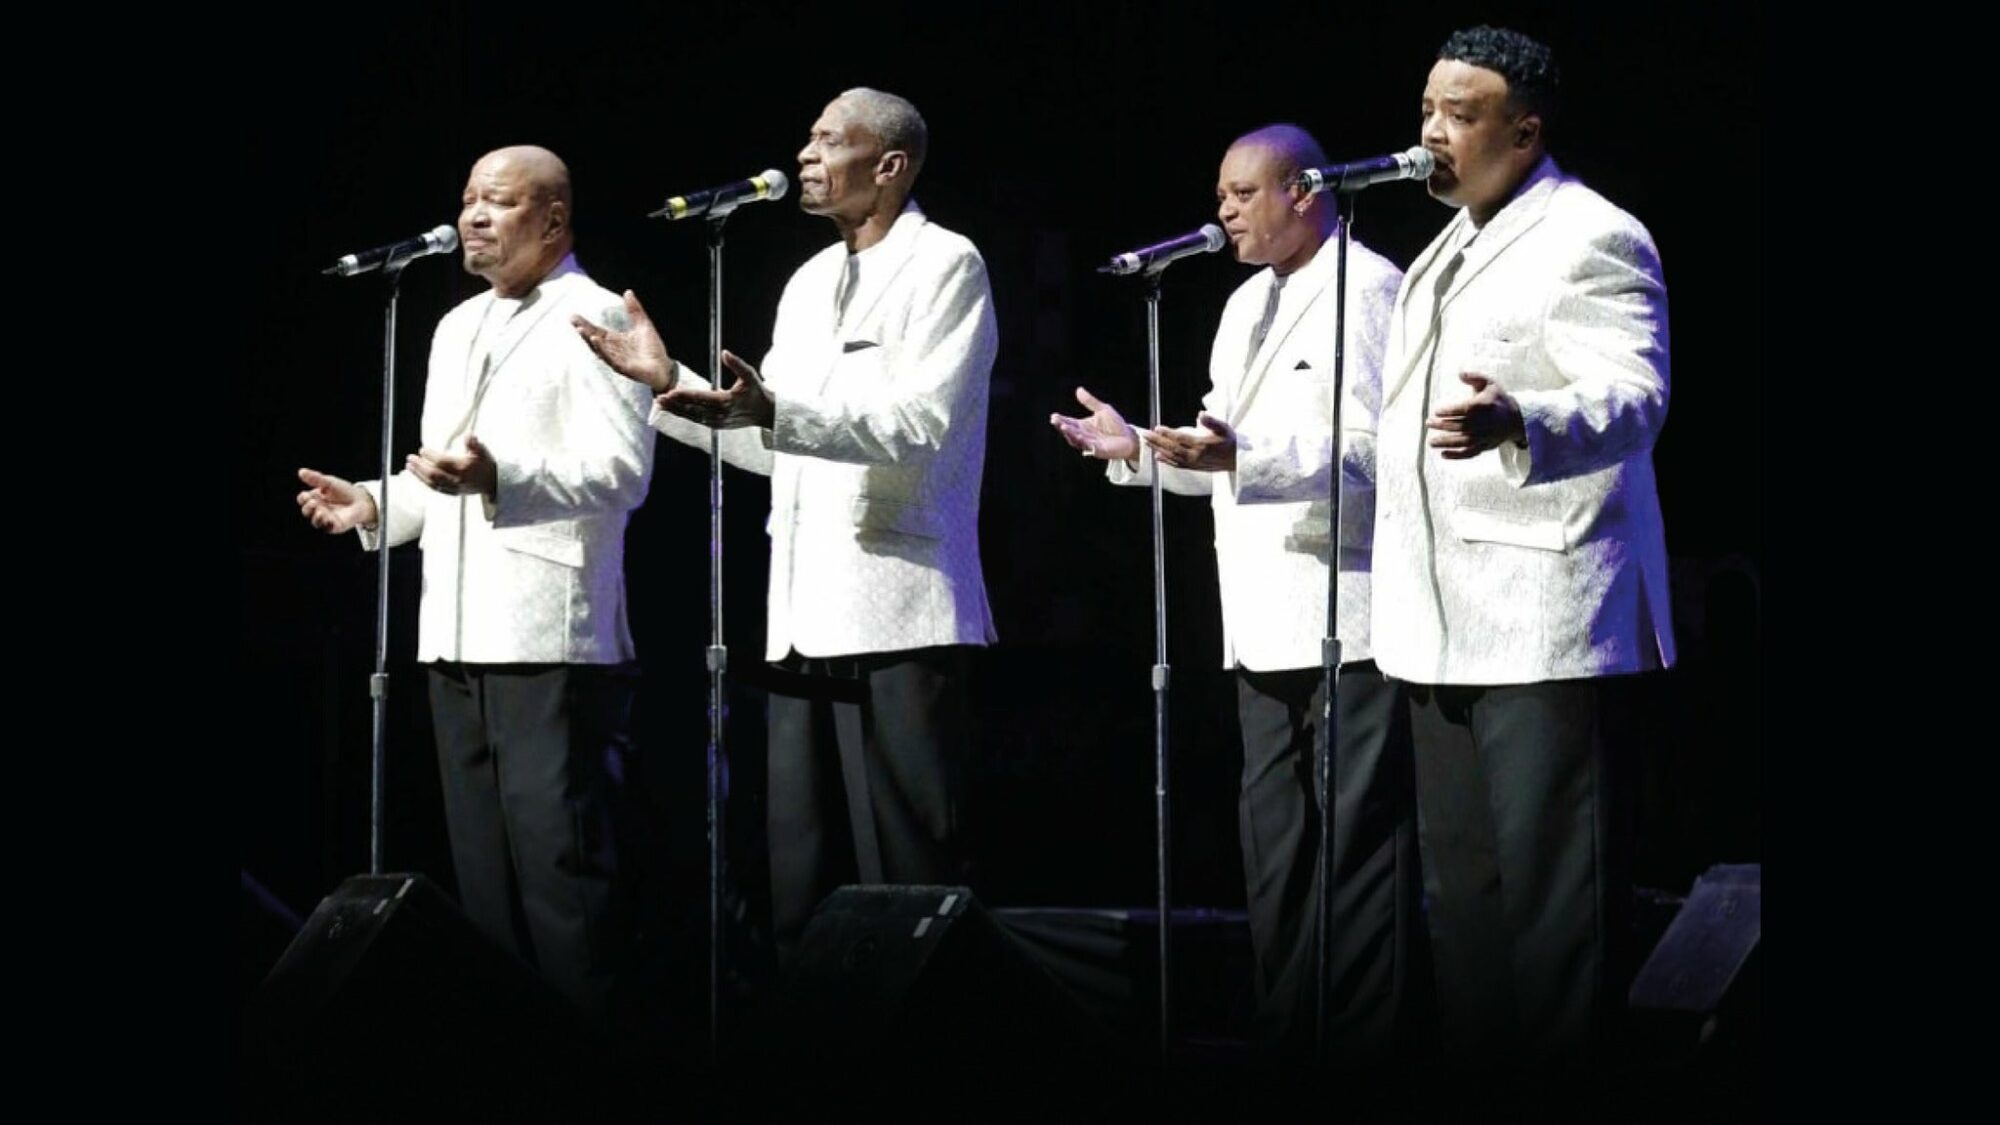 Image name The Stylistics at Sheffield City Hall Oval Hall Sheffield the 2 image from the post The Stylistics at Sheffield City Hall Oval Hall, Sheffield in Yorkshire.com.